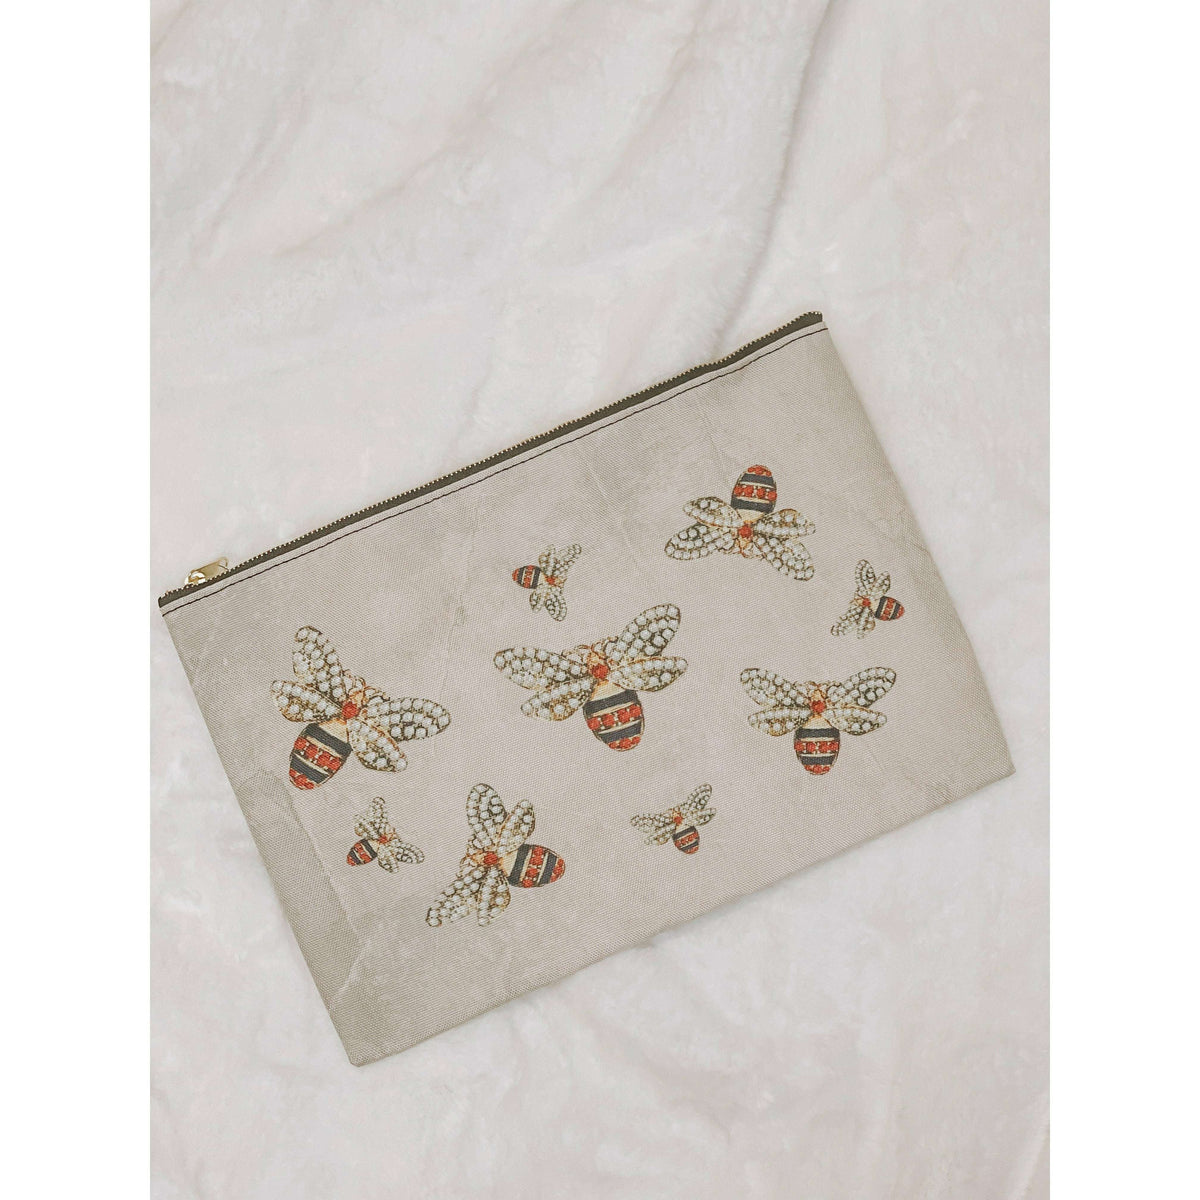 Queen Bee Pouch - The Hive by Chris Jesselle